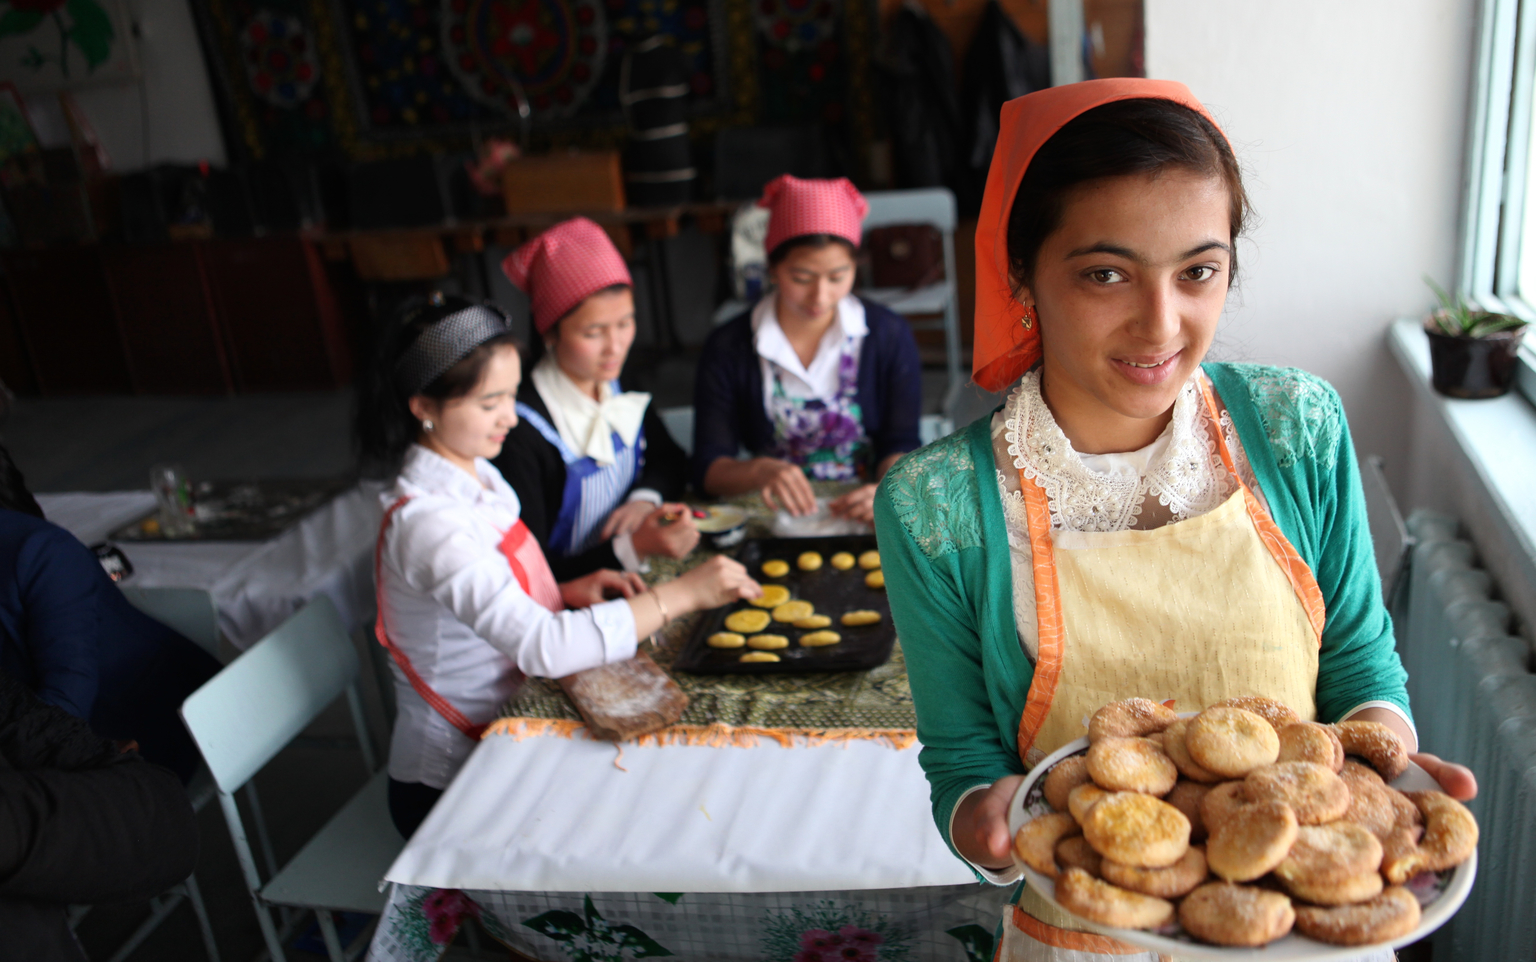 Tajikistan commits to 1,000 Golden Days Strategy to improve nutrition and development outcomes among children